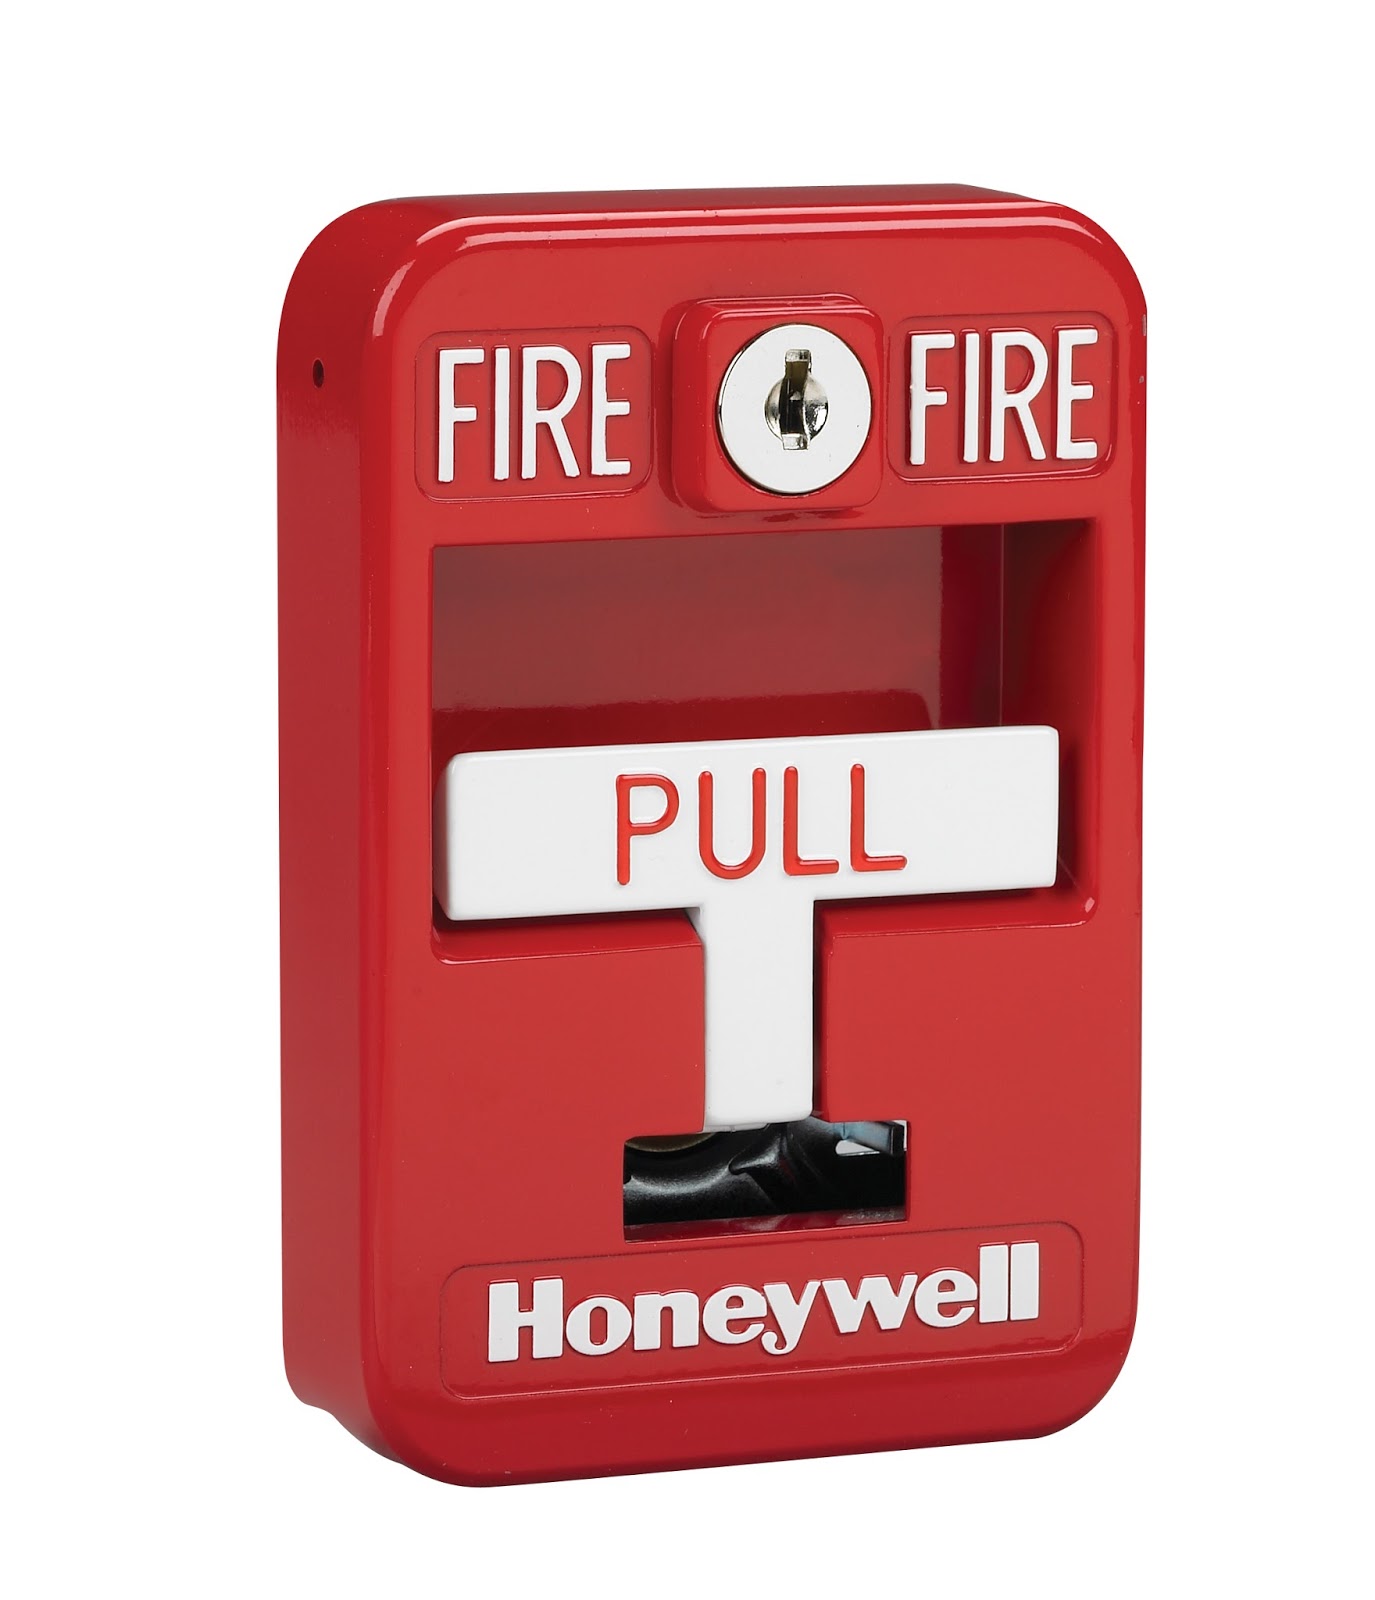 Fire Alarm Systems Pull Down Fire Alarm Systems